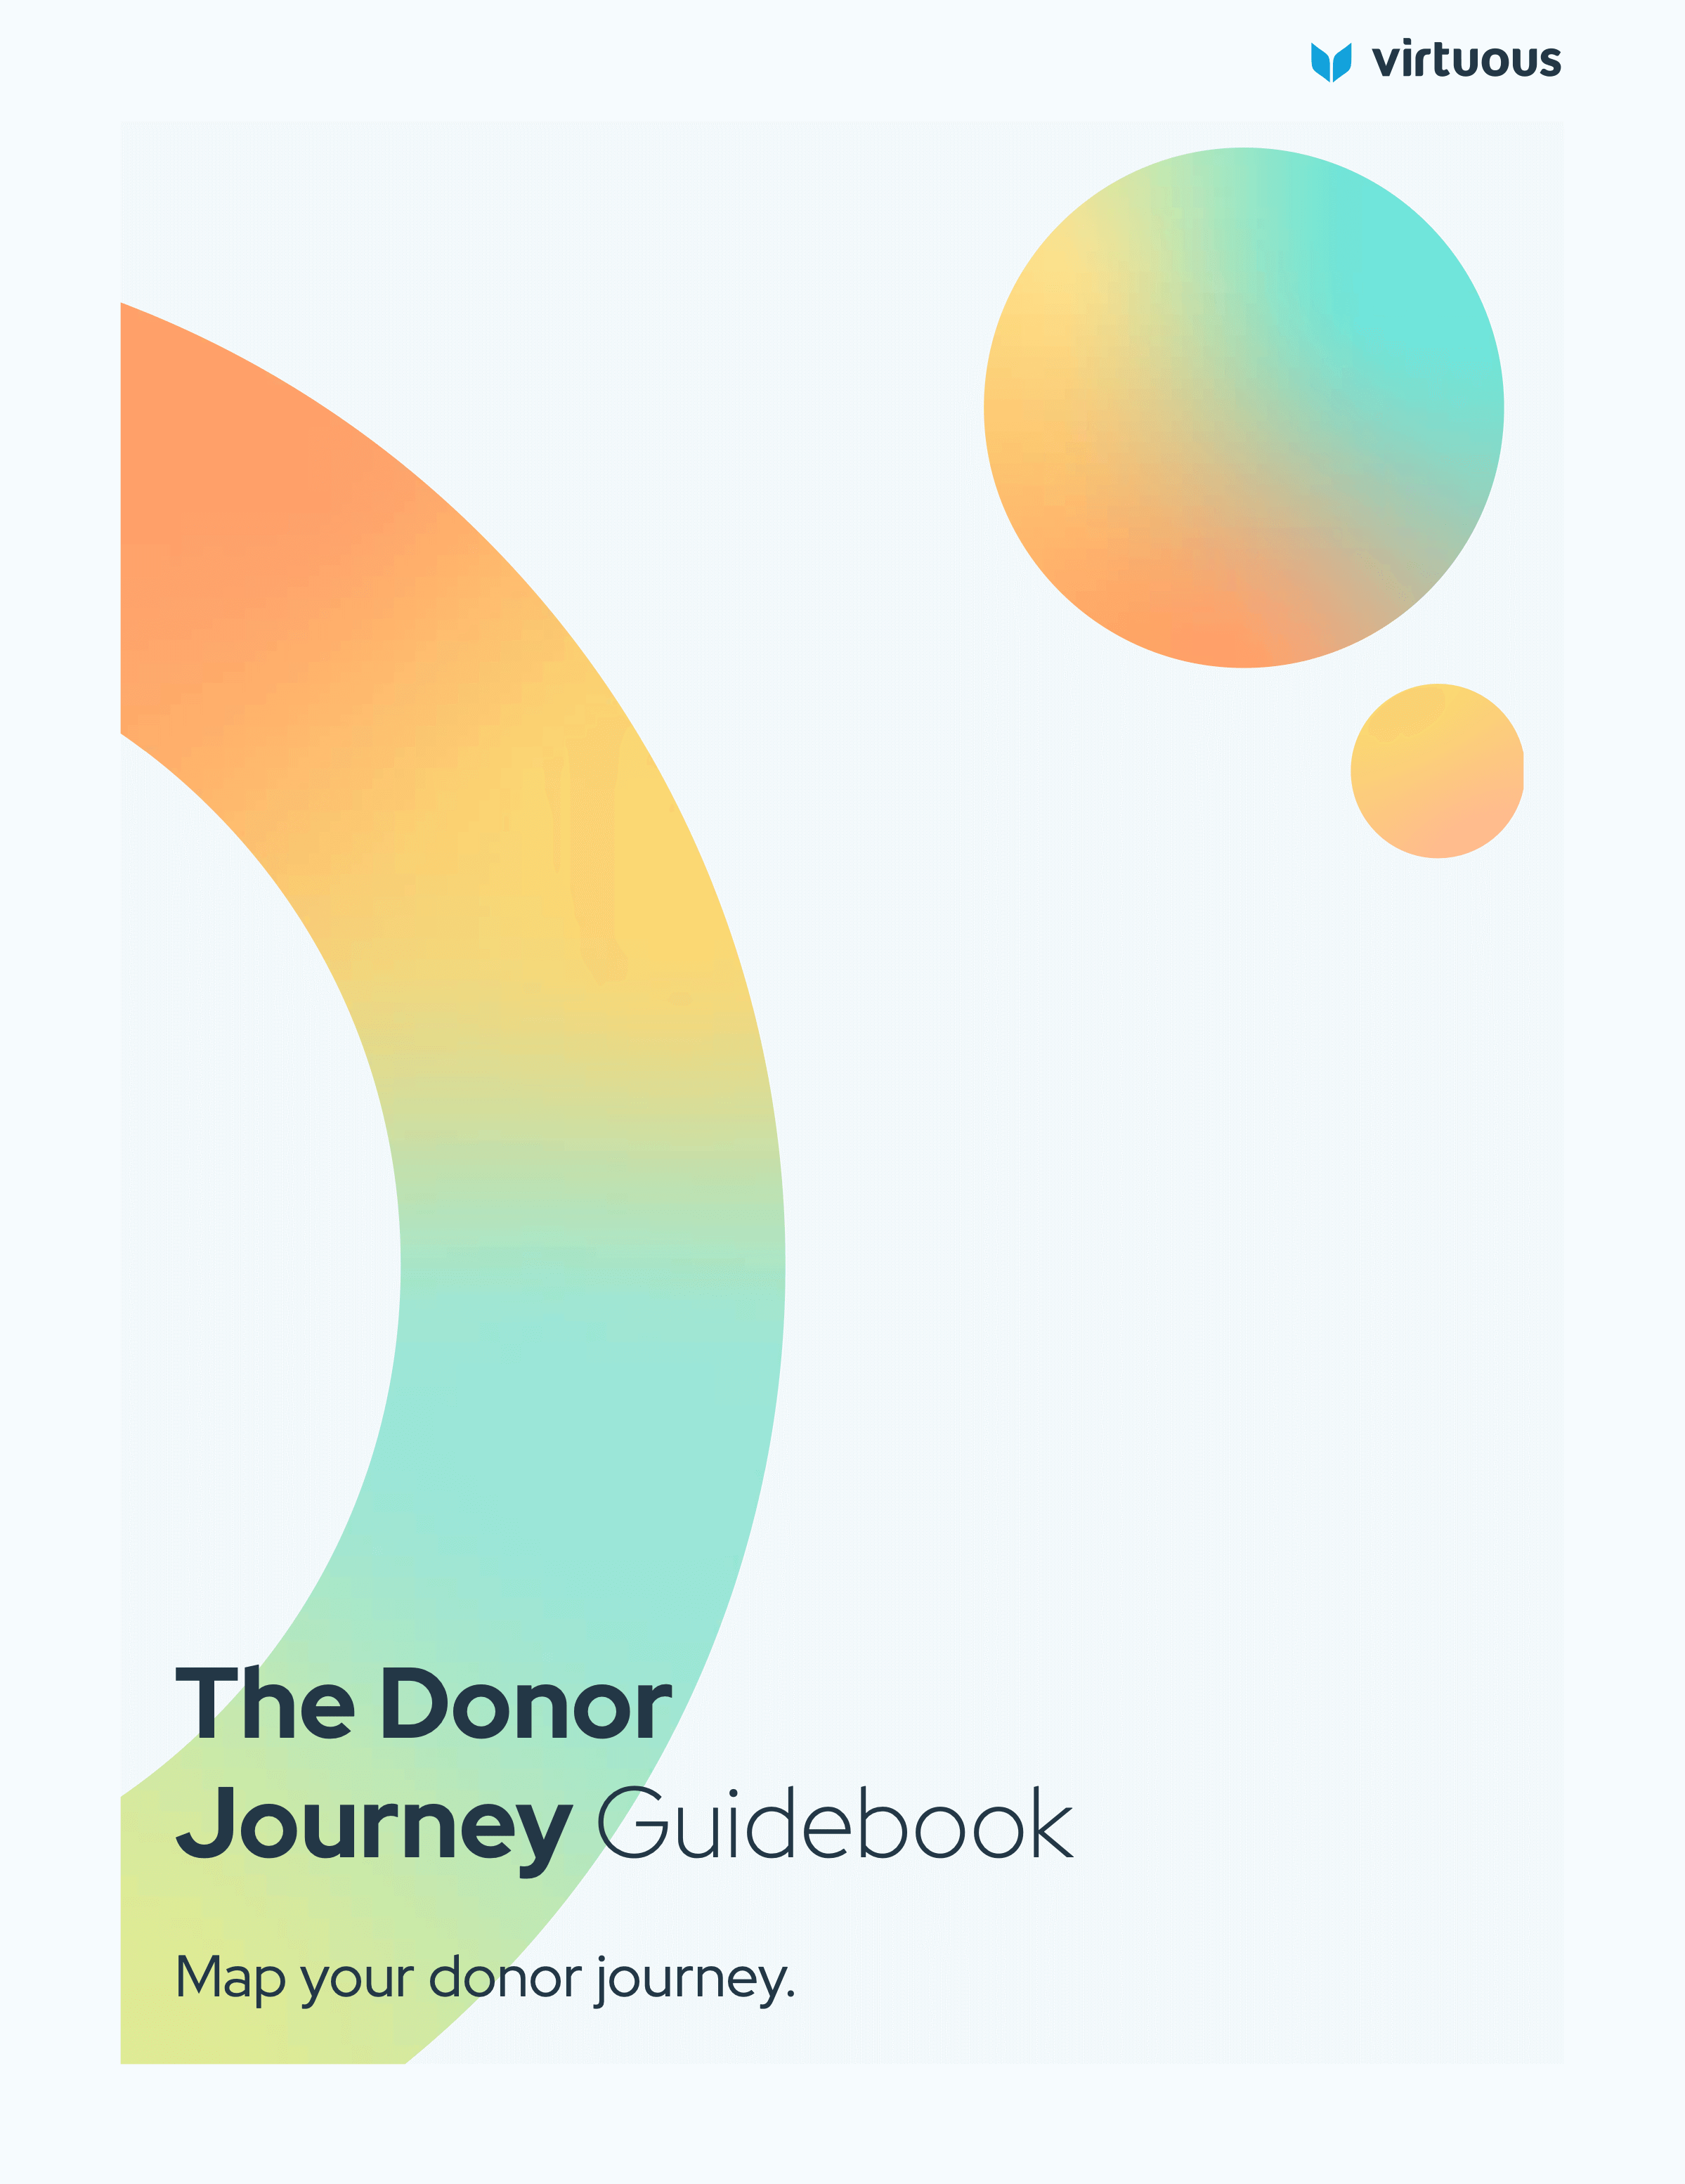 The Donor Journey Guidebook